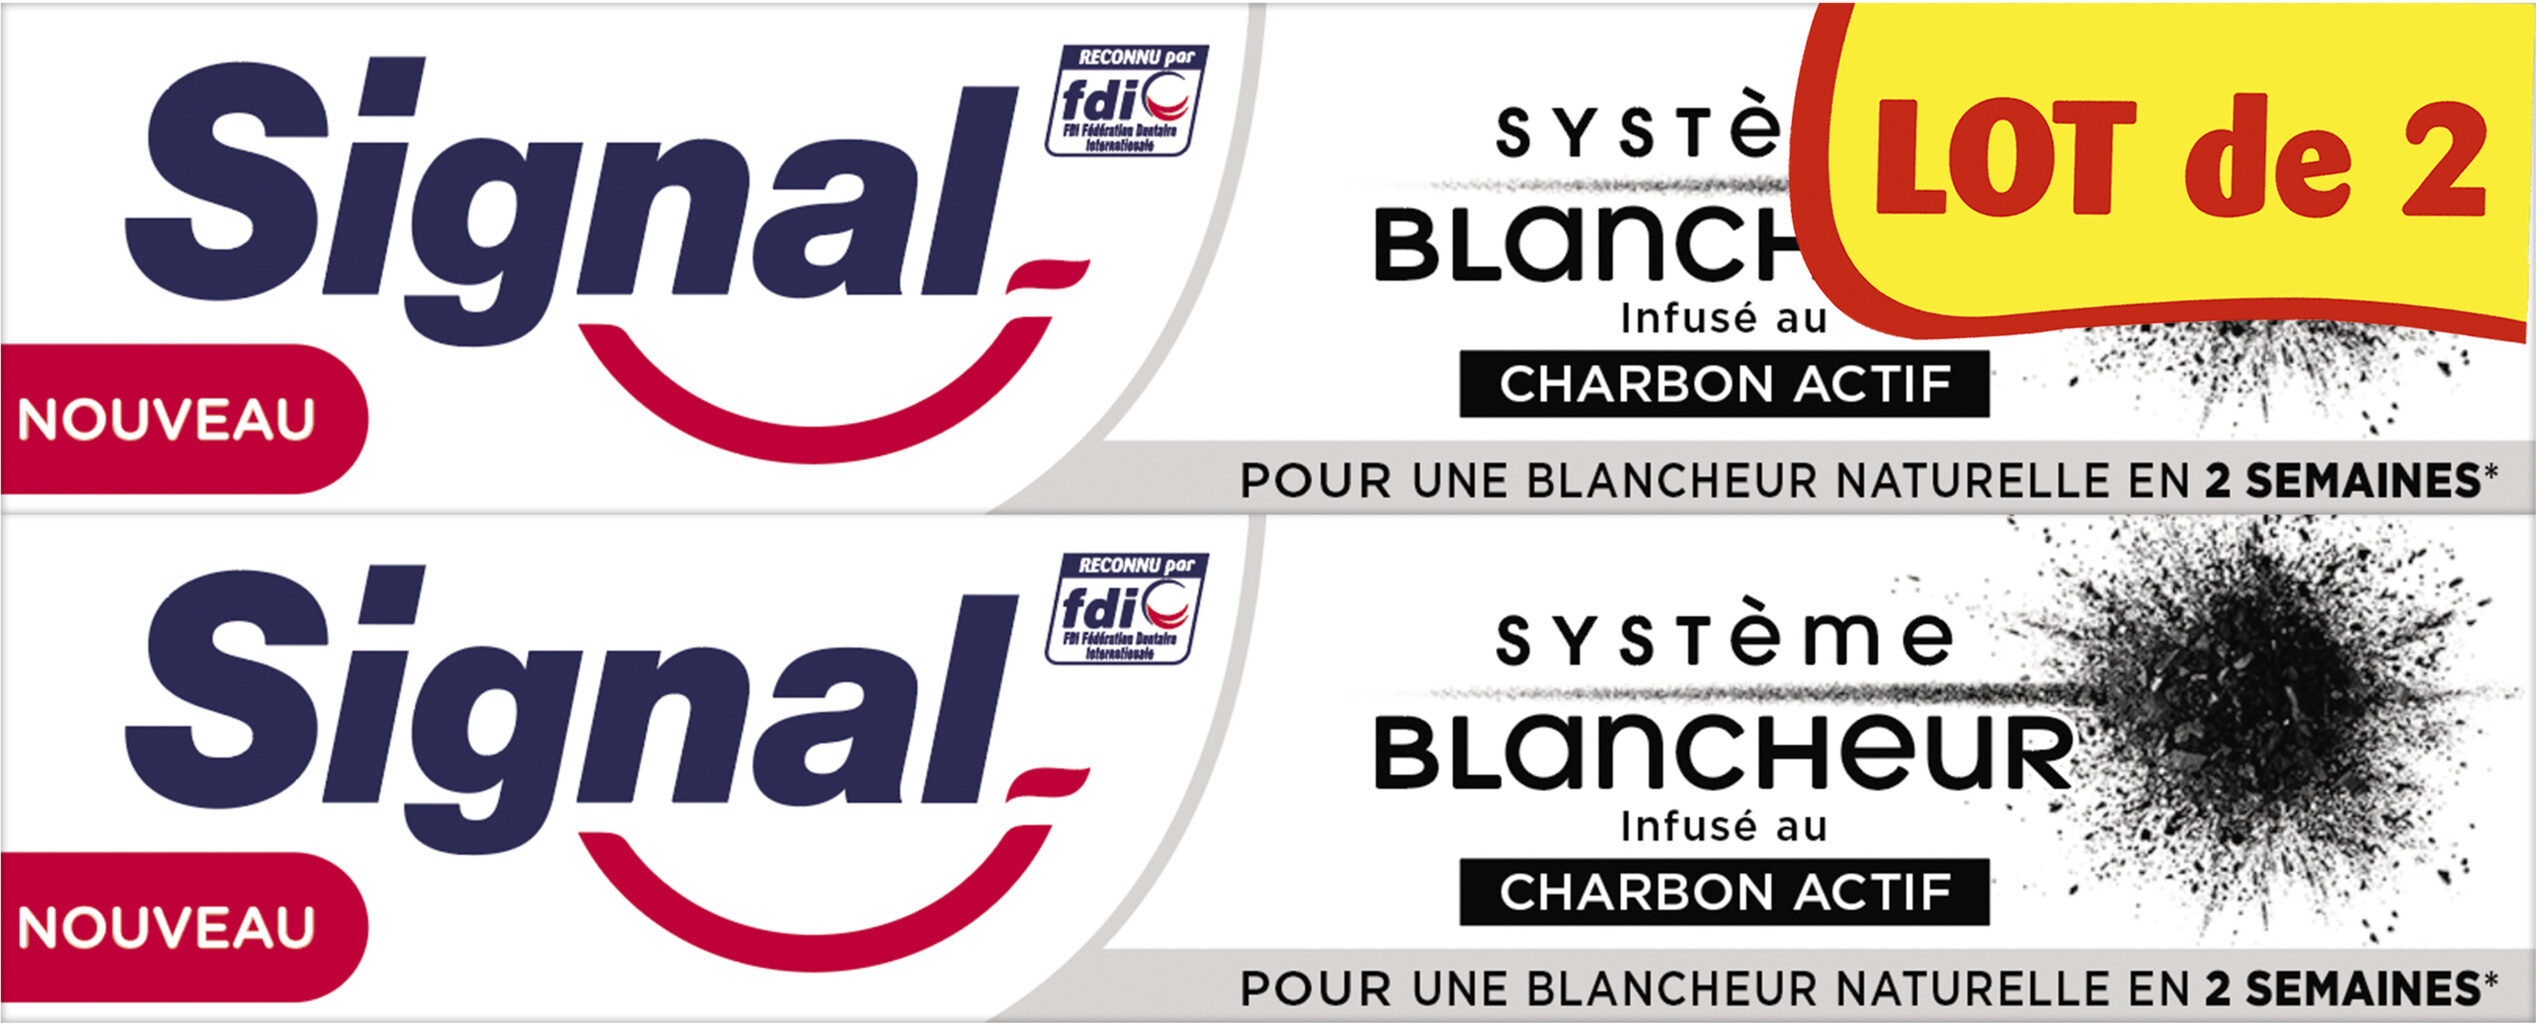 Signal Dentifrice Système Blancheur Charbon Actif 2x75ml - Product - fr